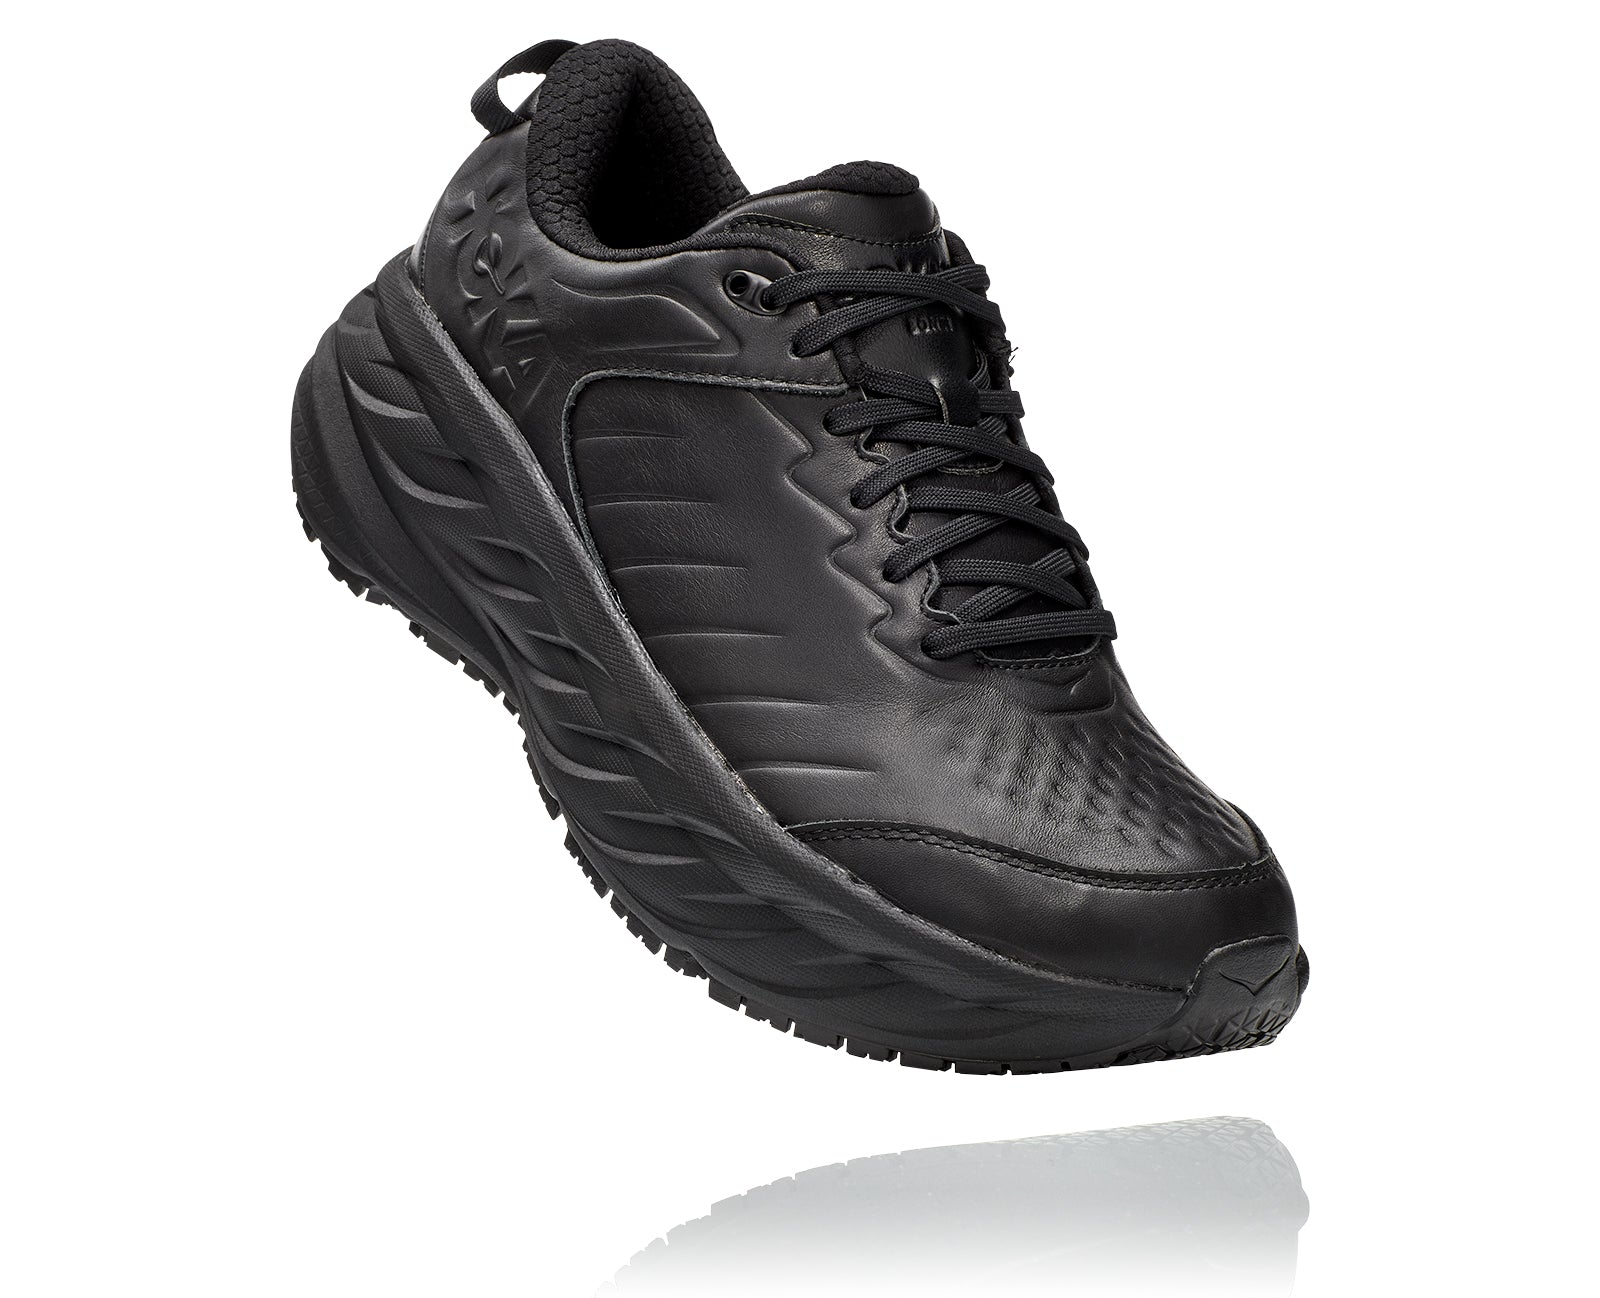 The Men's Hoka Bondi SR features a water-resistant leather upper along with a slip-resistant outsole.